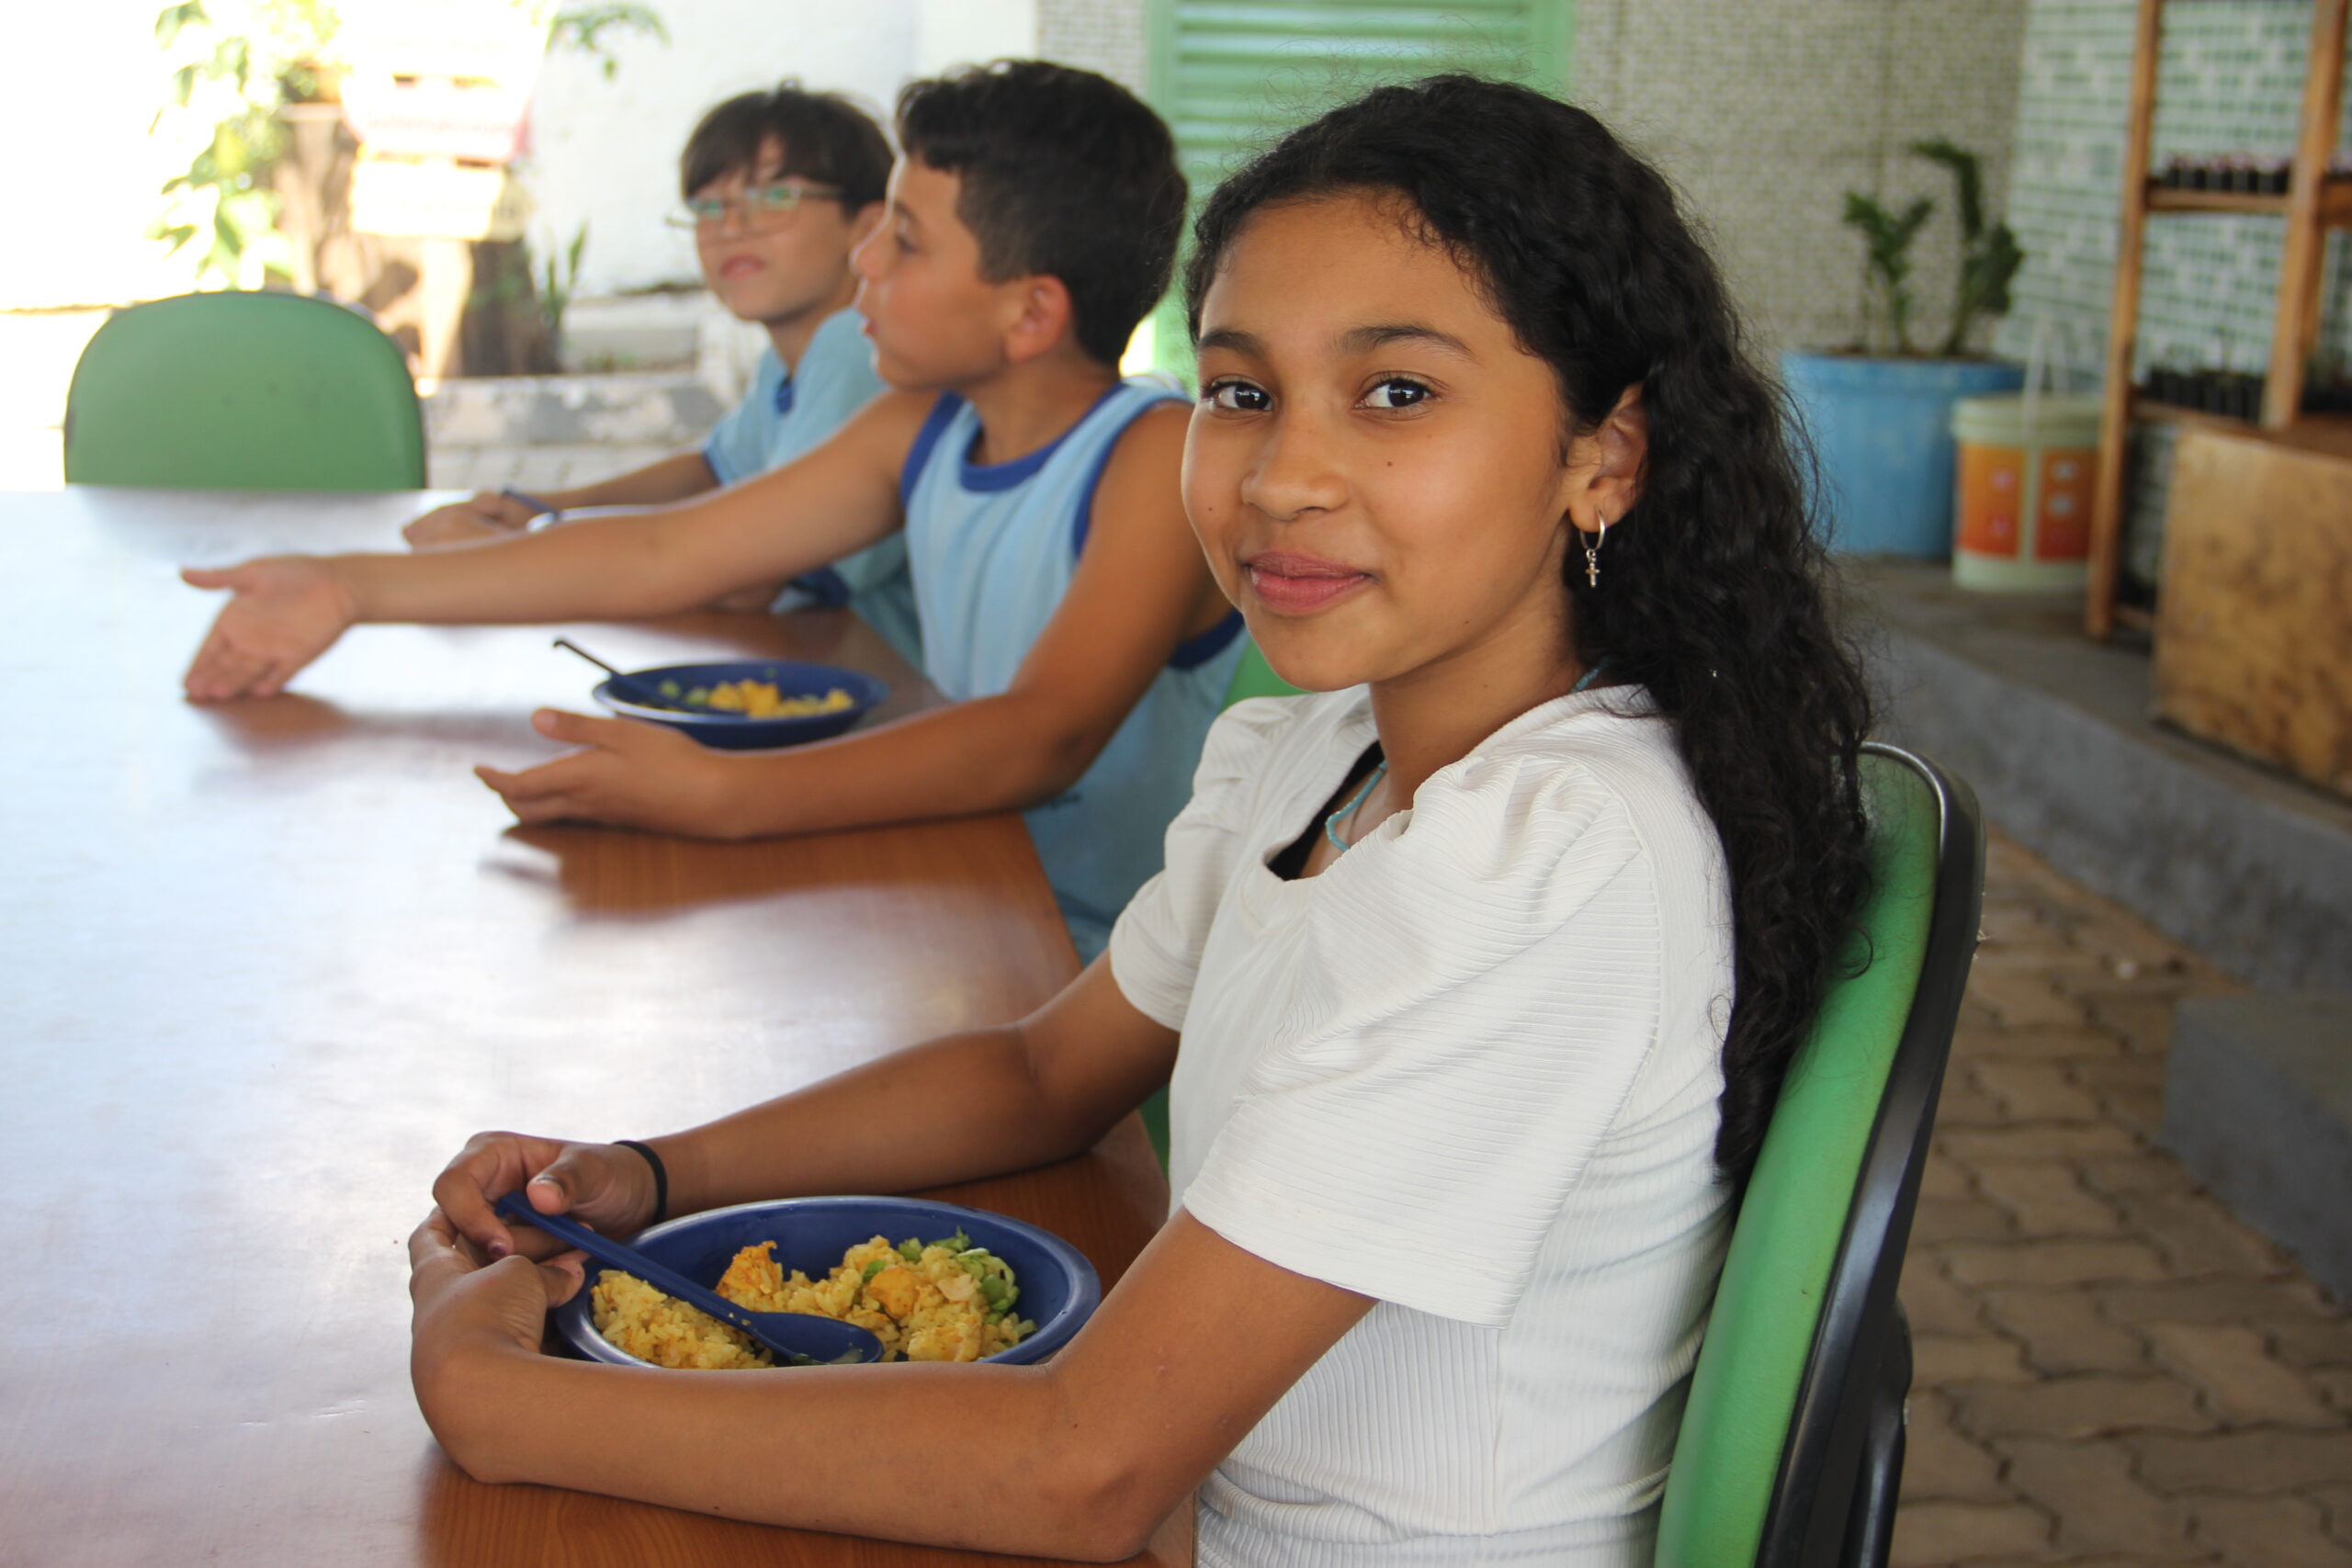 Children eating a plate of typical Brazilain dish made of chicken with rice during break time in a Brazilian public school.